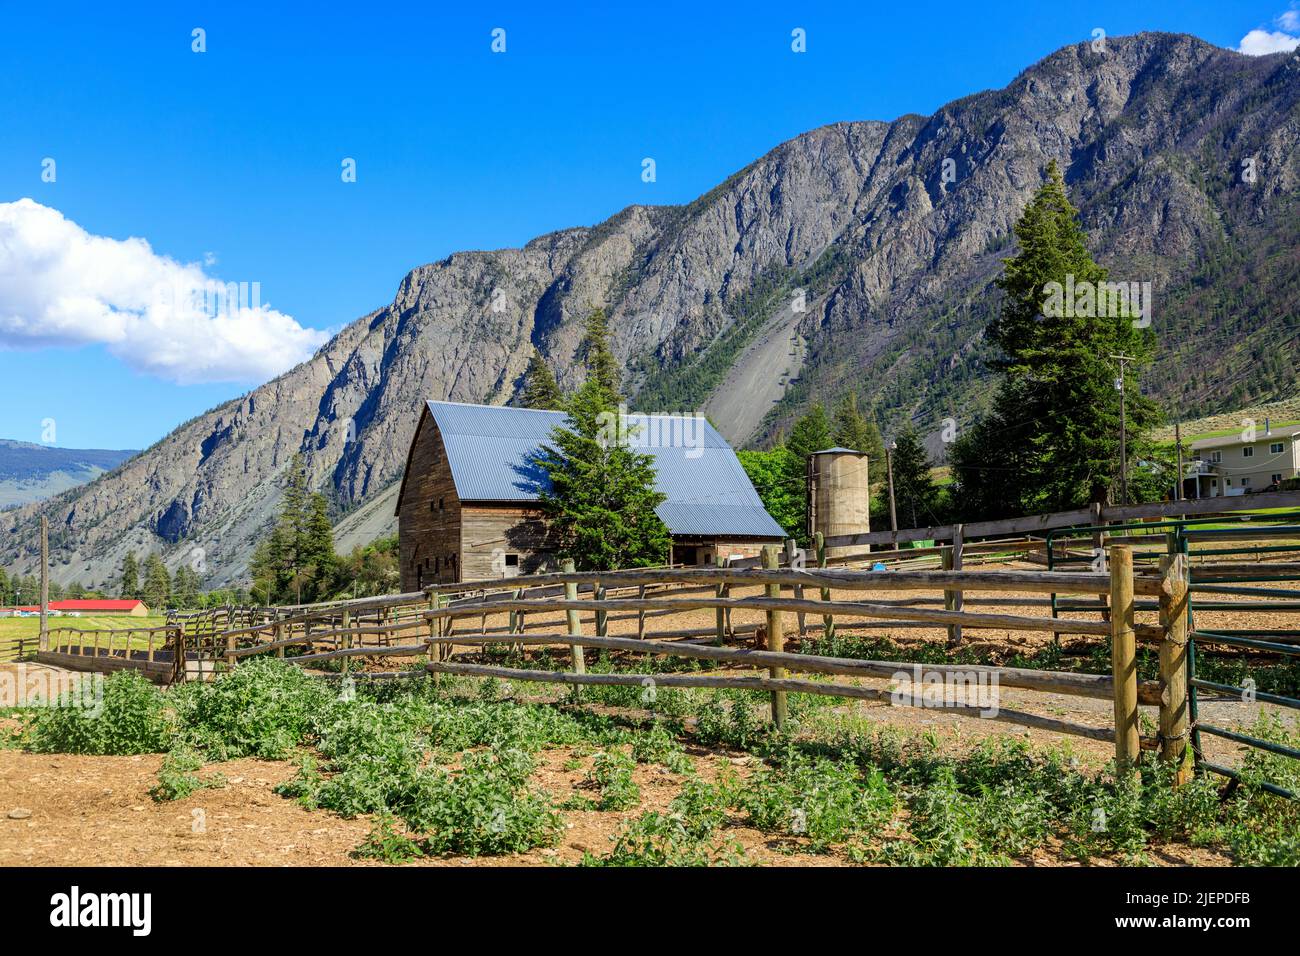 Canadian landscape of an old rustic wood barn in the Similkameen Valley near Keremeos, British Columbia, Canada. Stock Photo